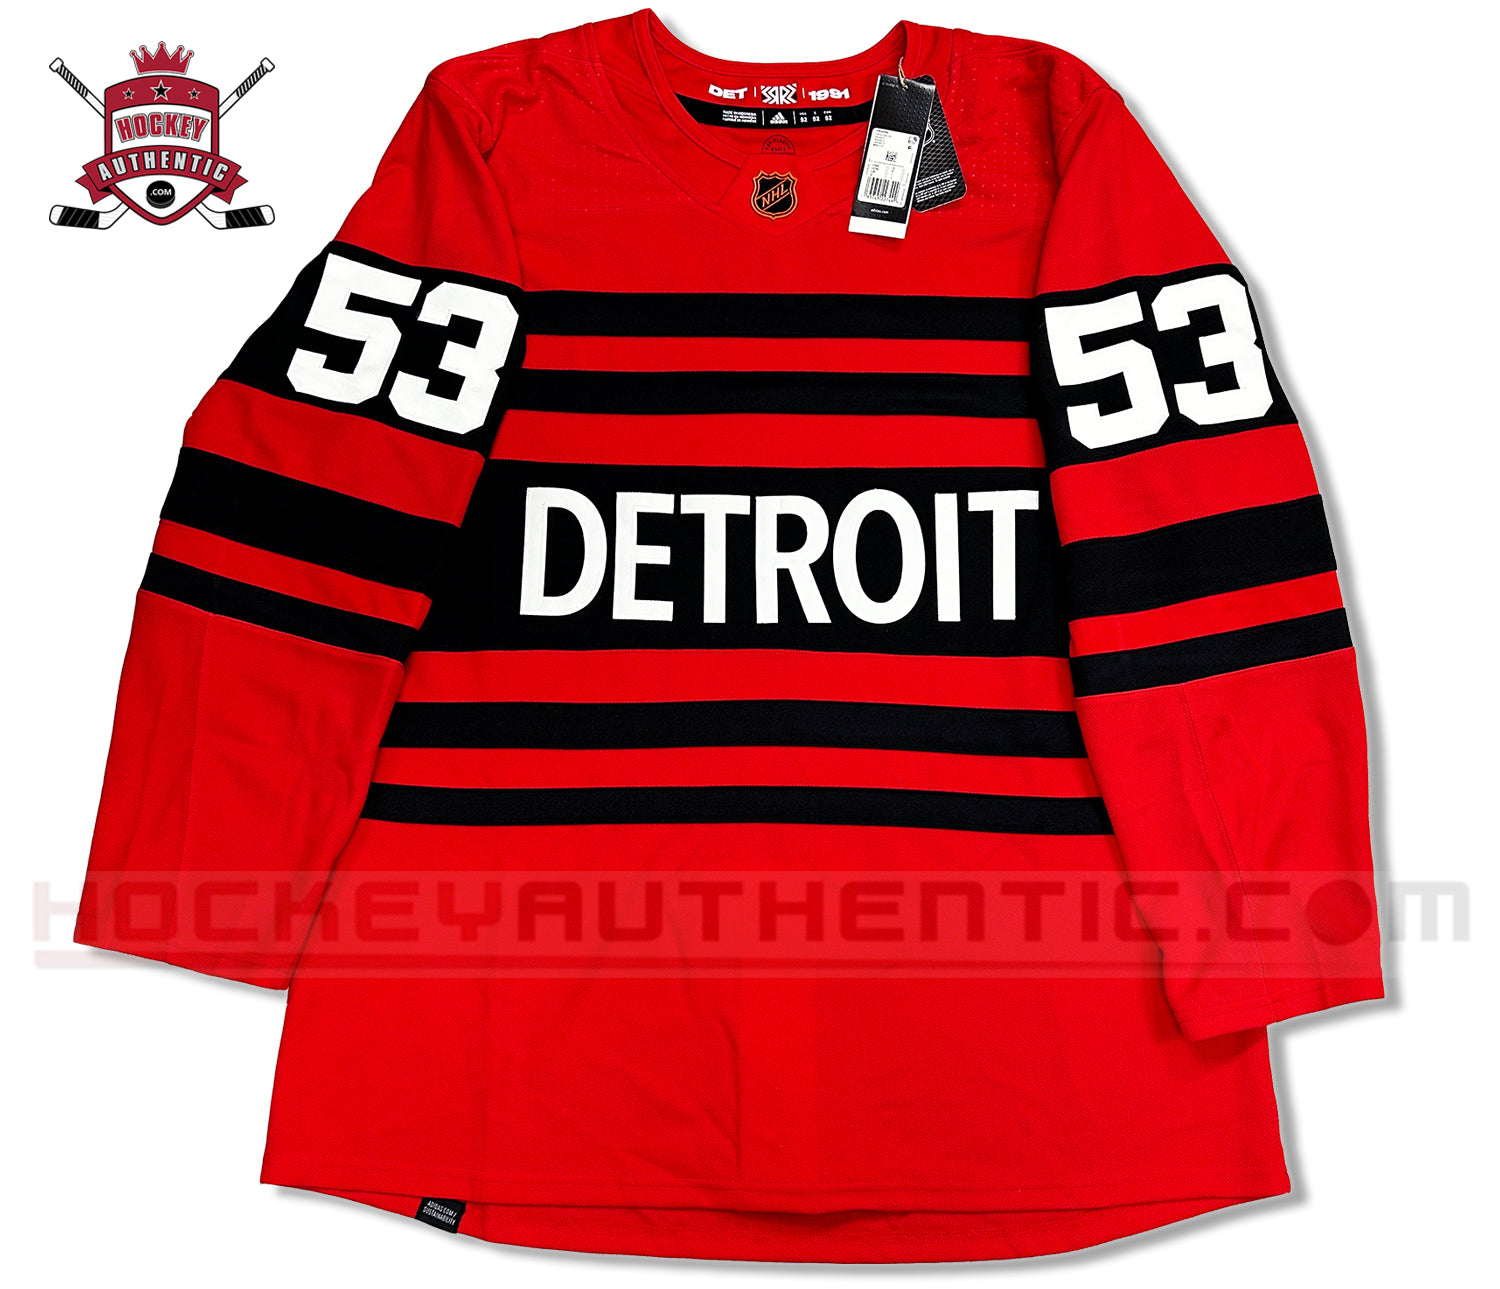 NEW adidas Detroit Red Wings White Away Authentic Pro Jersey Size 52